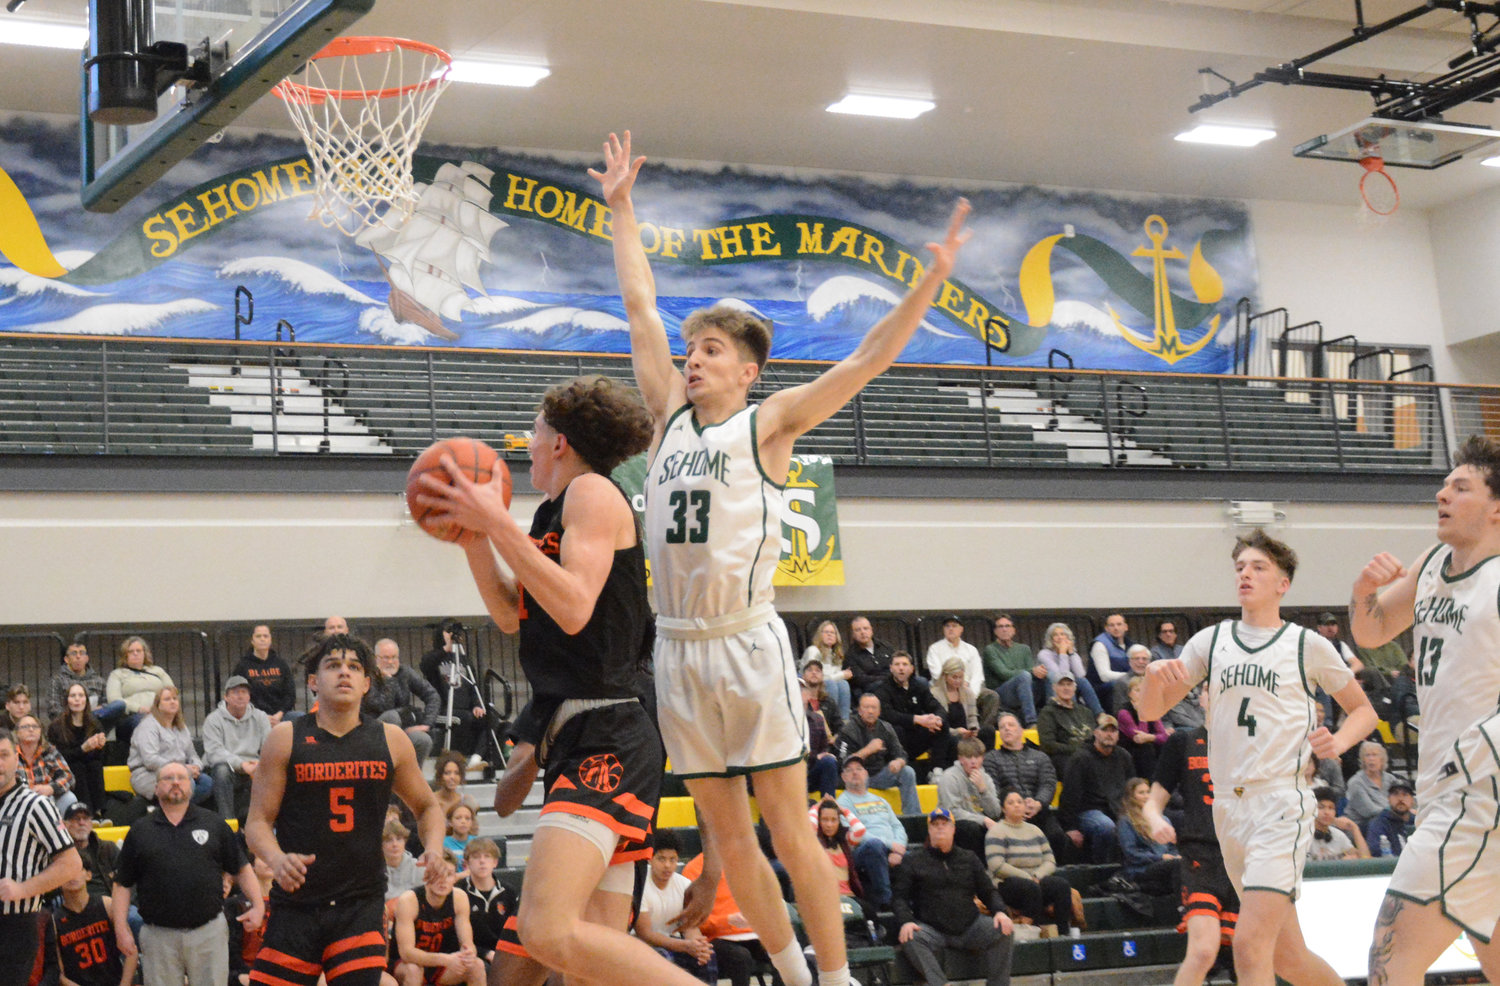 Lucas Smith goes up for a layup in Blaine’s 60-49 loss at Sehome High School January 31. Smith finished with 18 points.